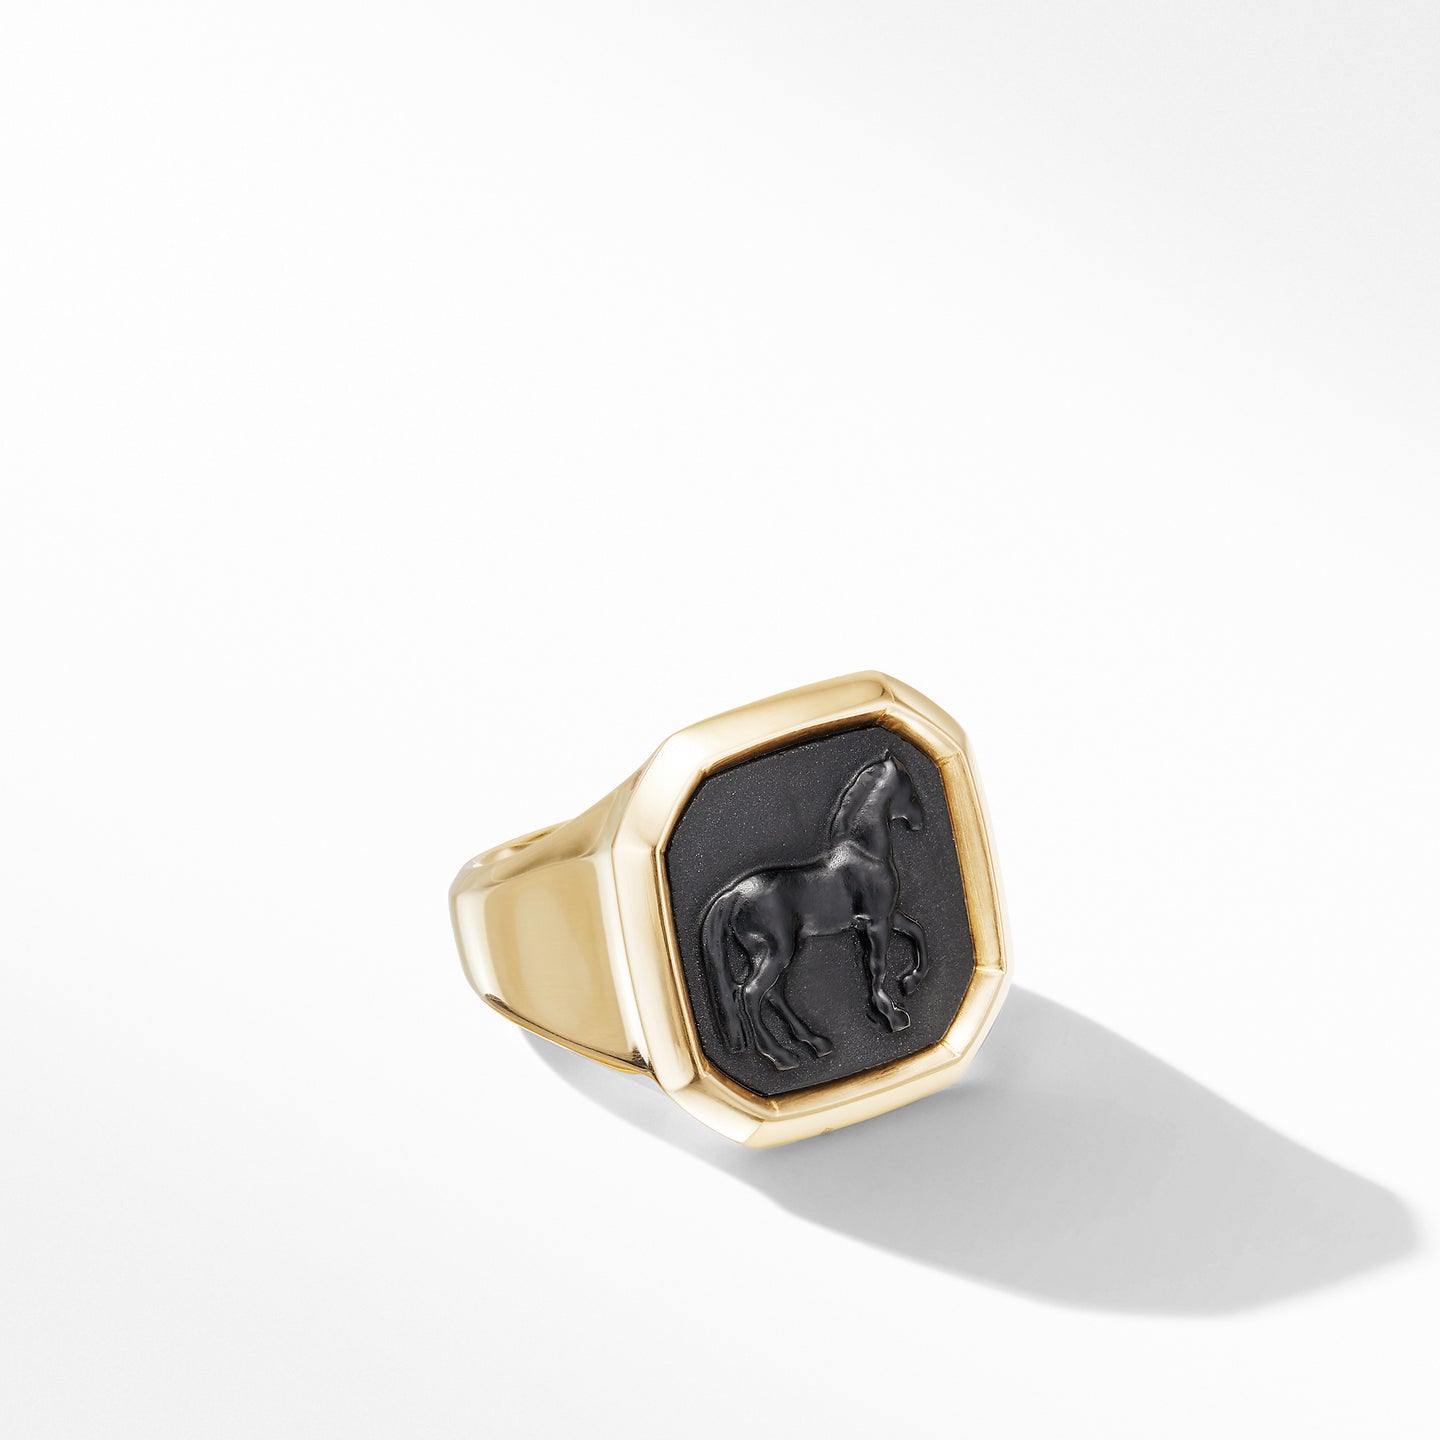 Petrvs® Large Horse Ring in 18K Yellow Gold with Black Onyx, Size 7